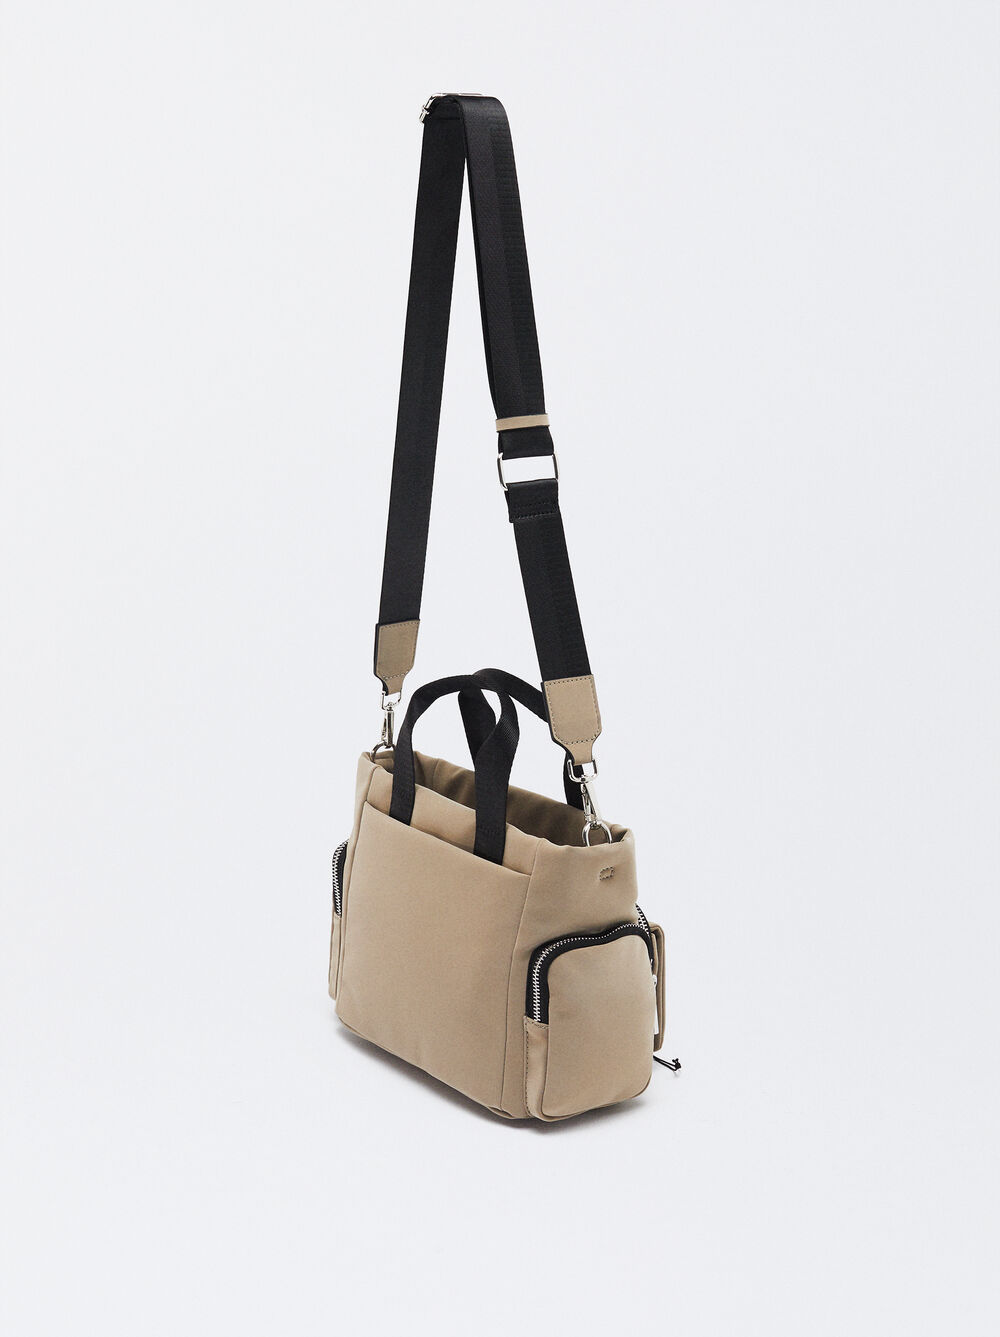 Tote Bag With Strap